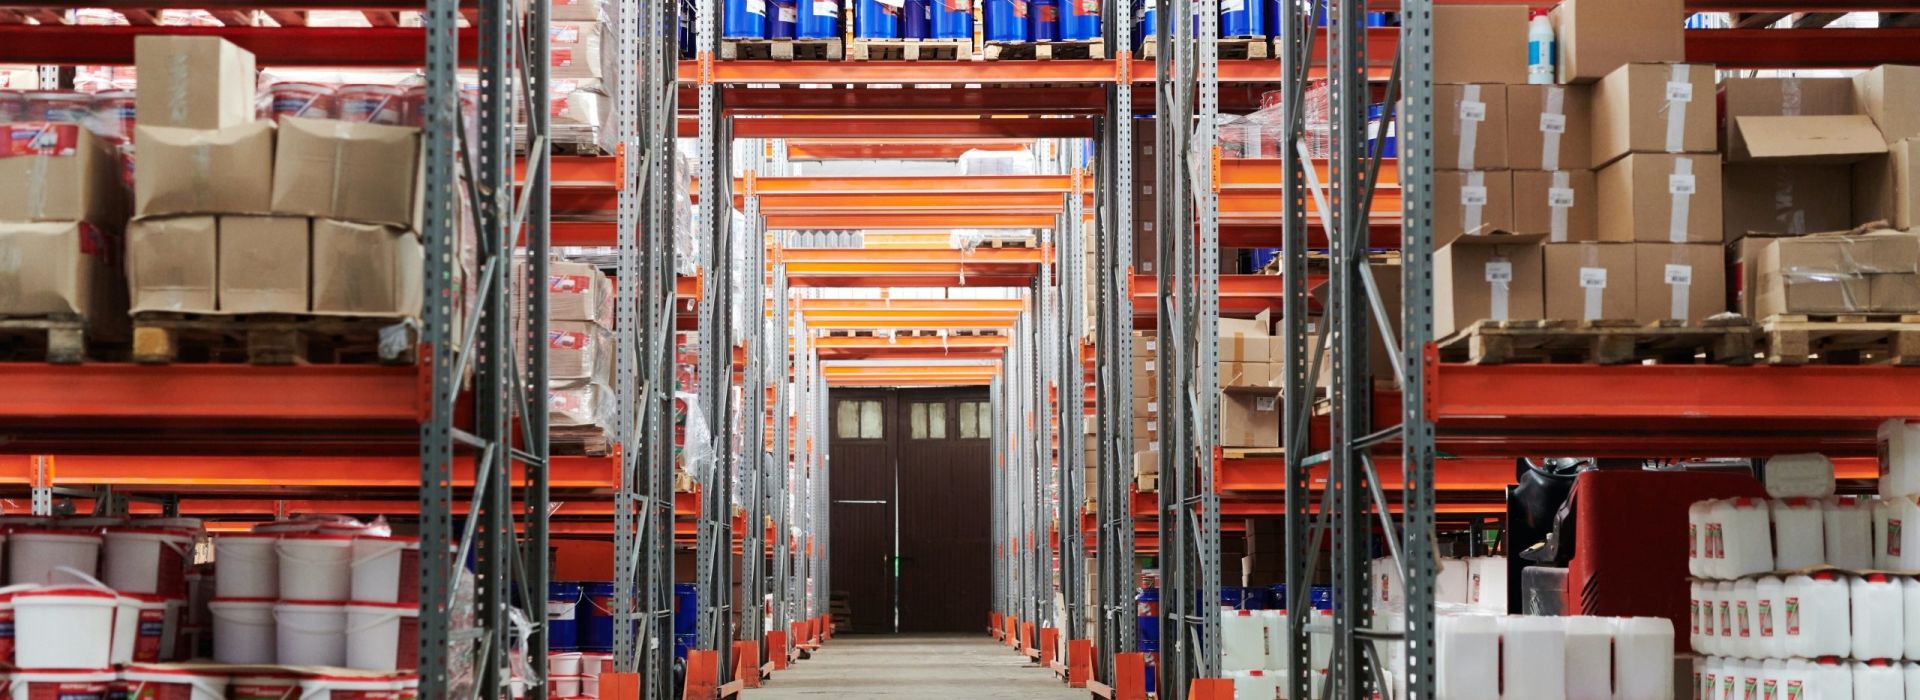 5 Tips to Optimise Inventory Management for Supply Chain Success (With Examples)